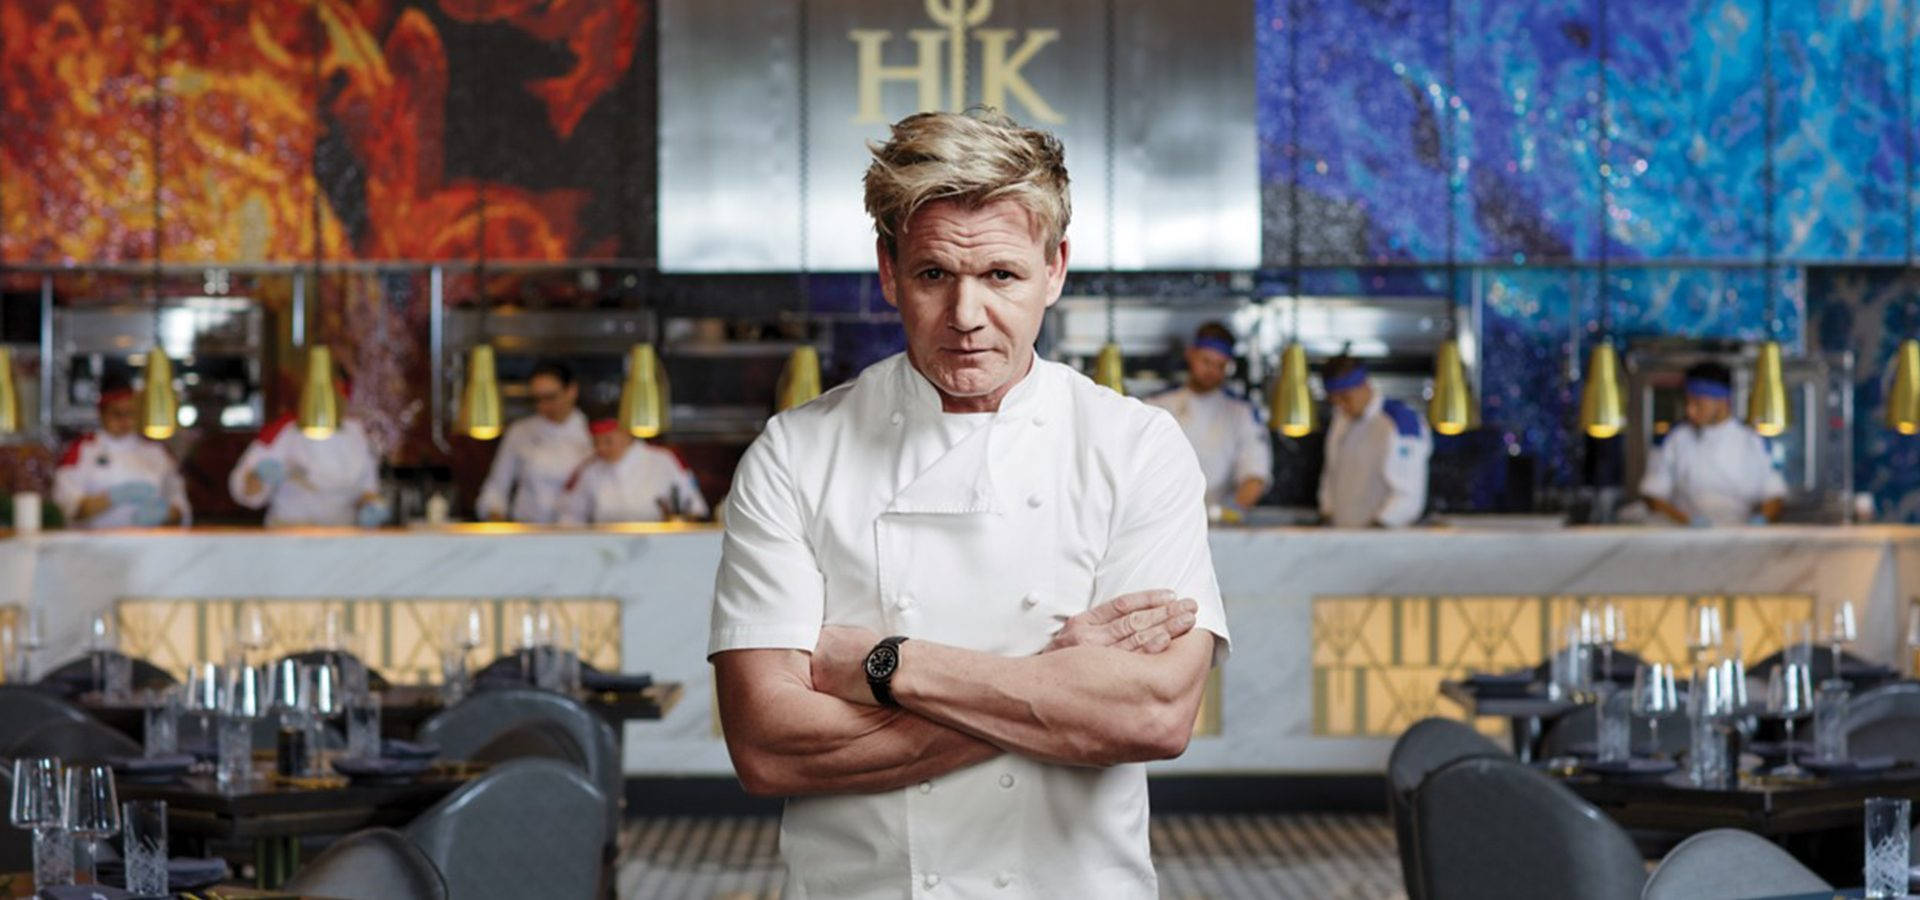 Gordonramsay Hell's Kitchen Would Be Translated To 